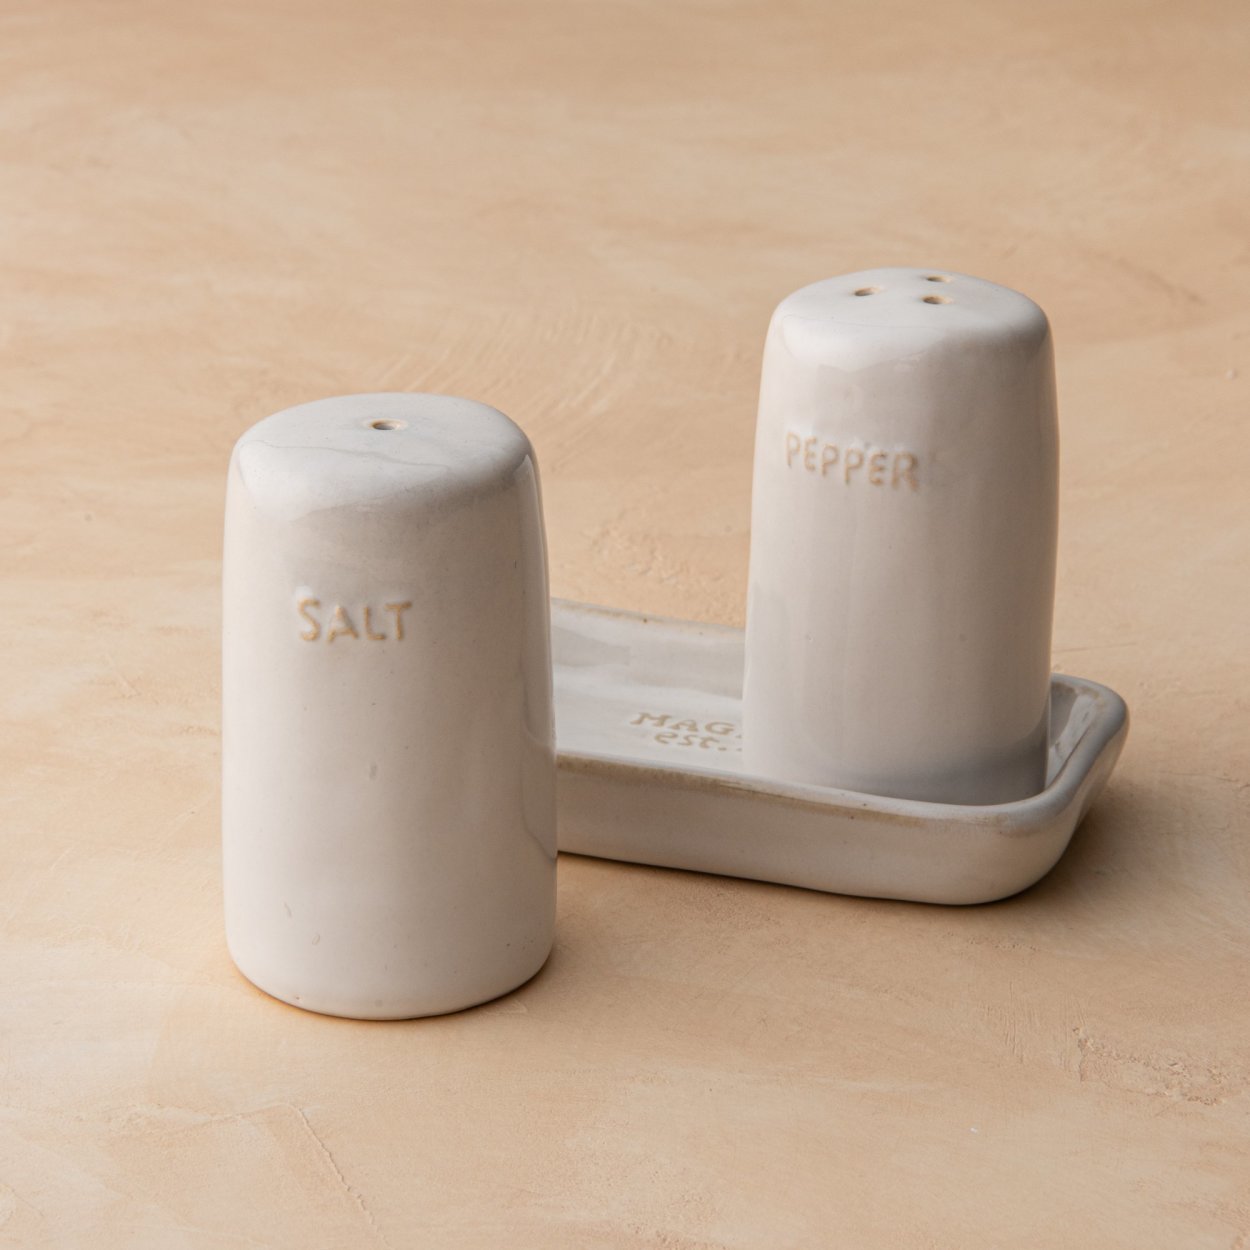 Easiest Cleaning Tips for Salt Shakers — Be Practical! - Maids By Trade